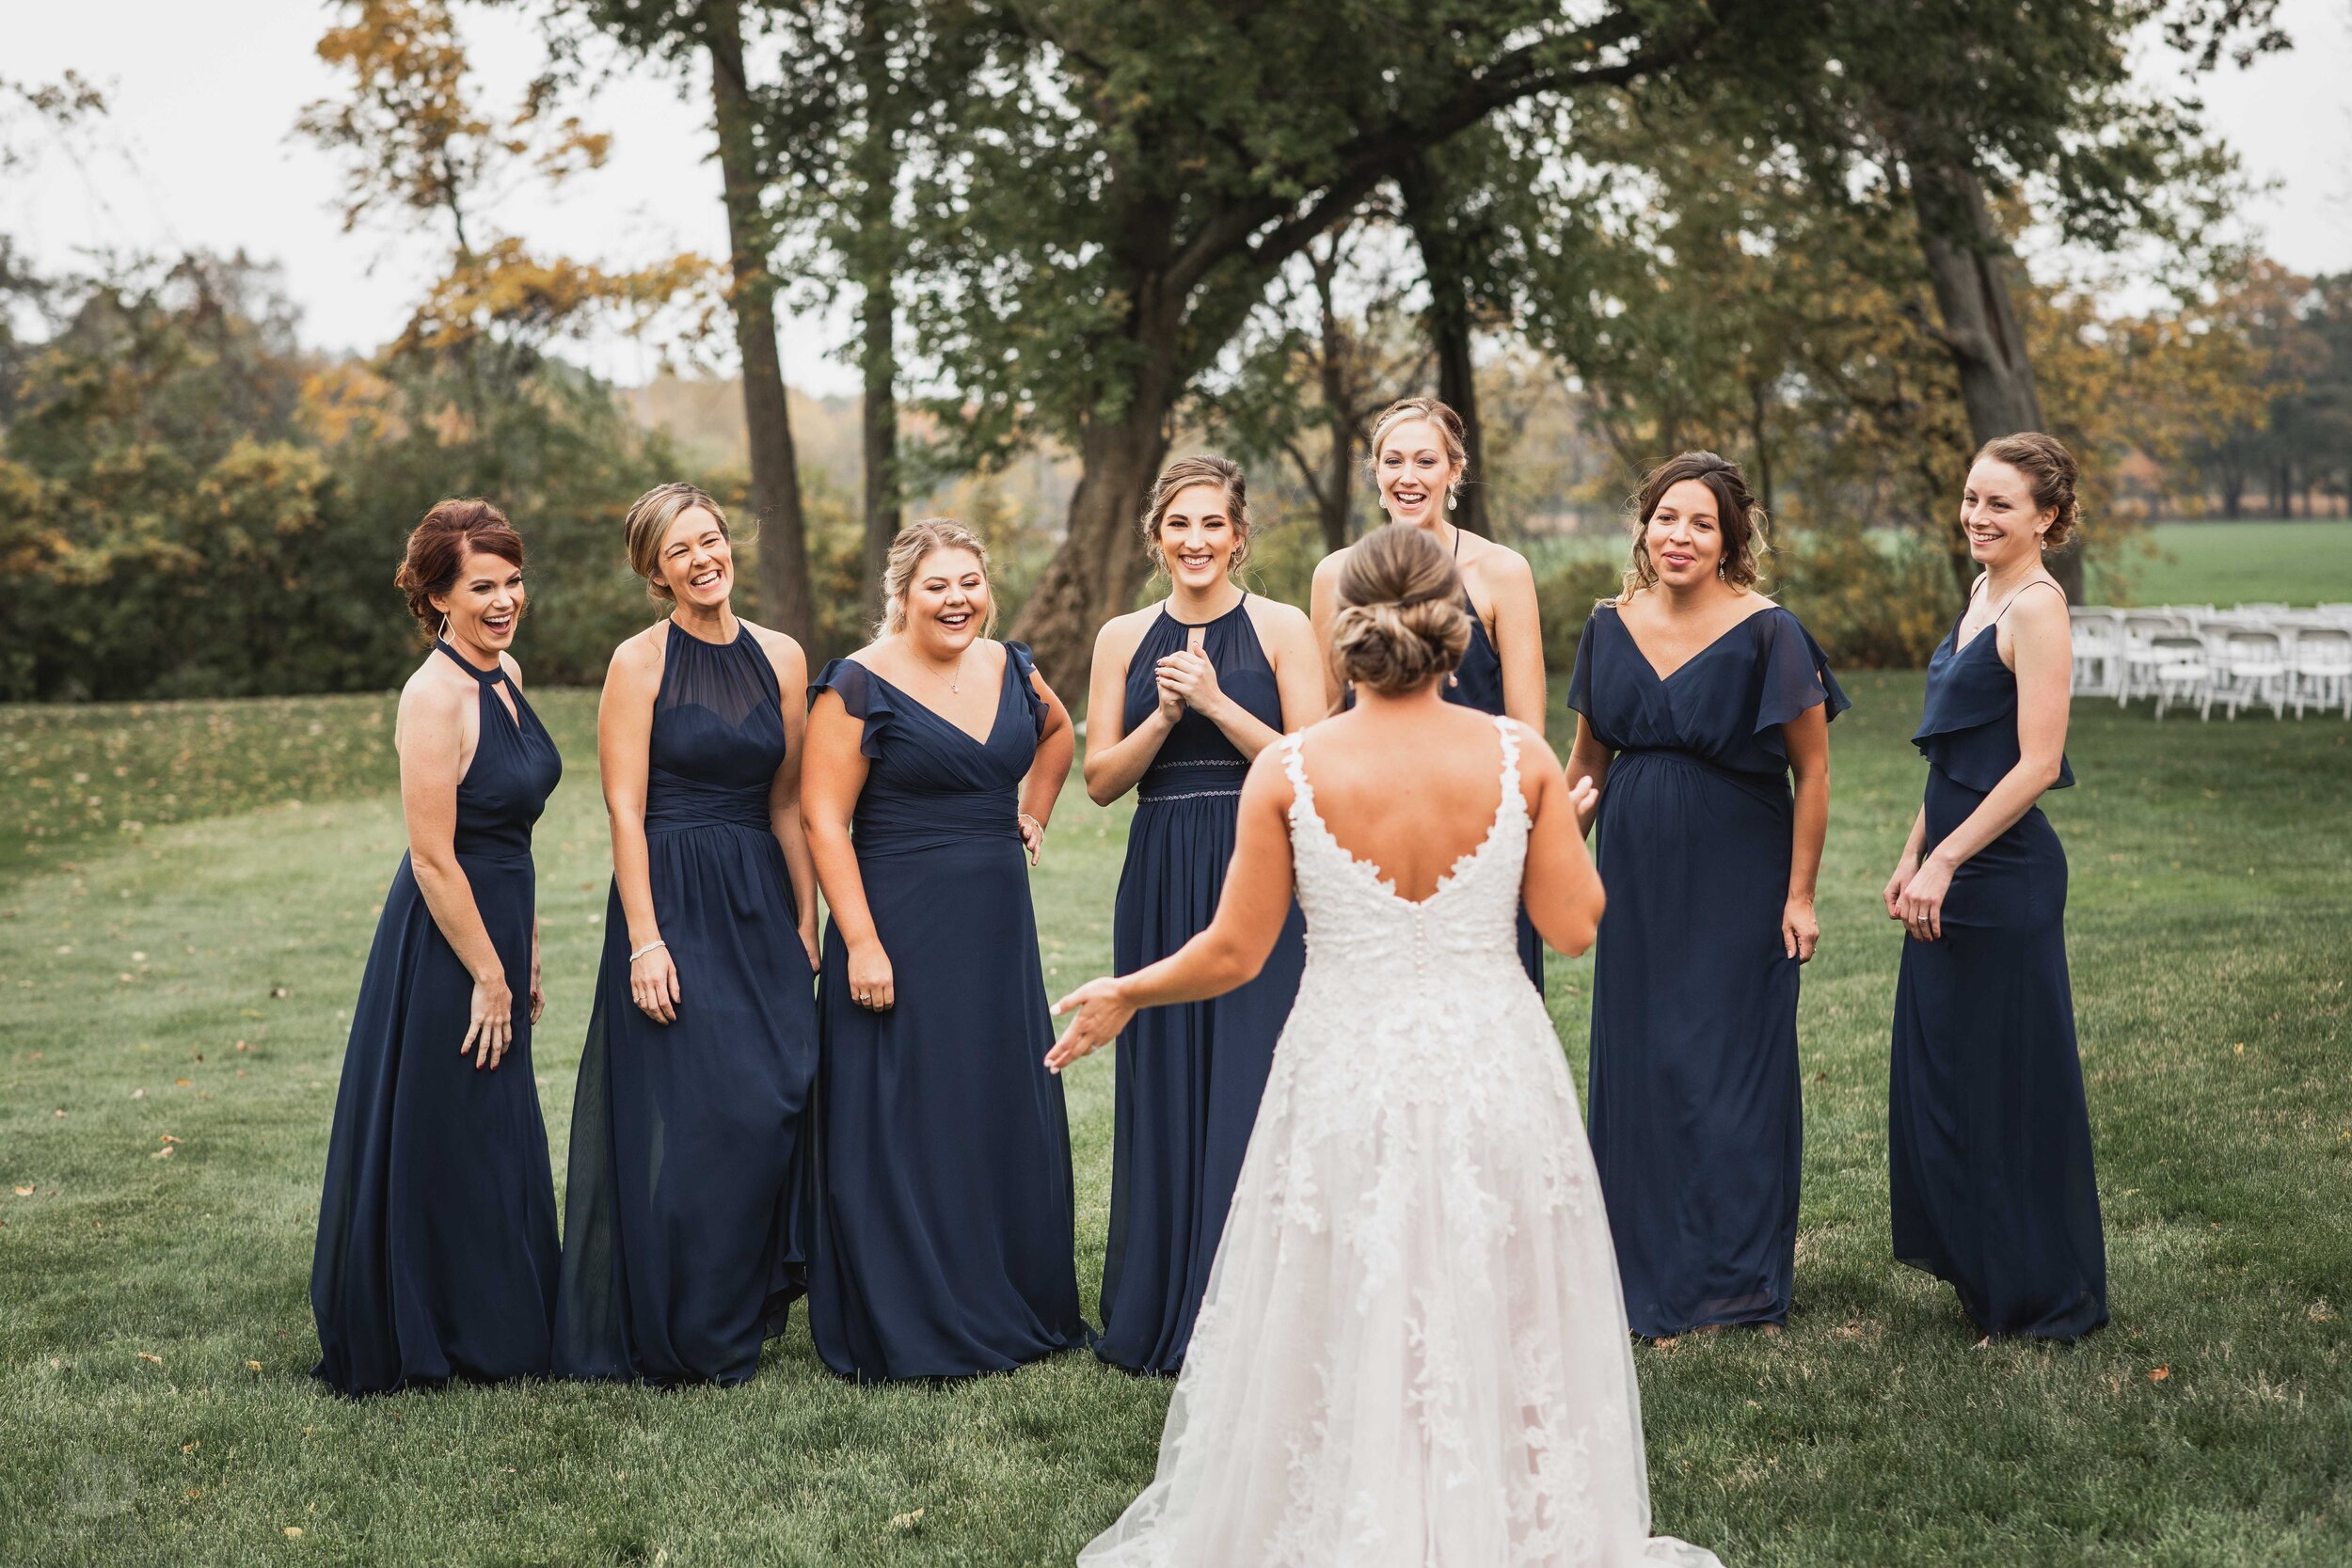  bride and bridesmaids first reveal 